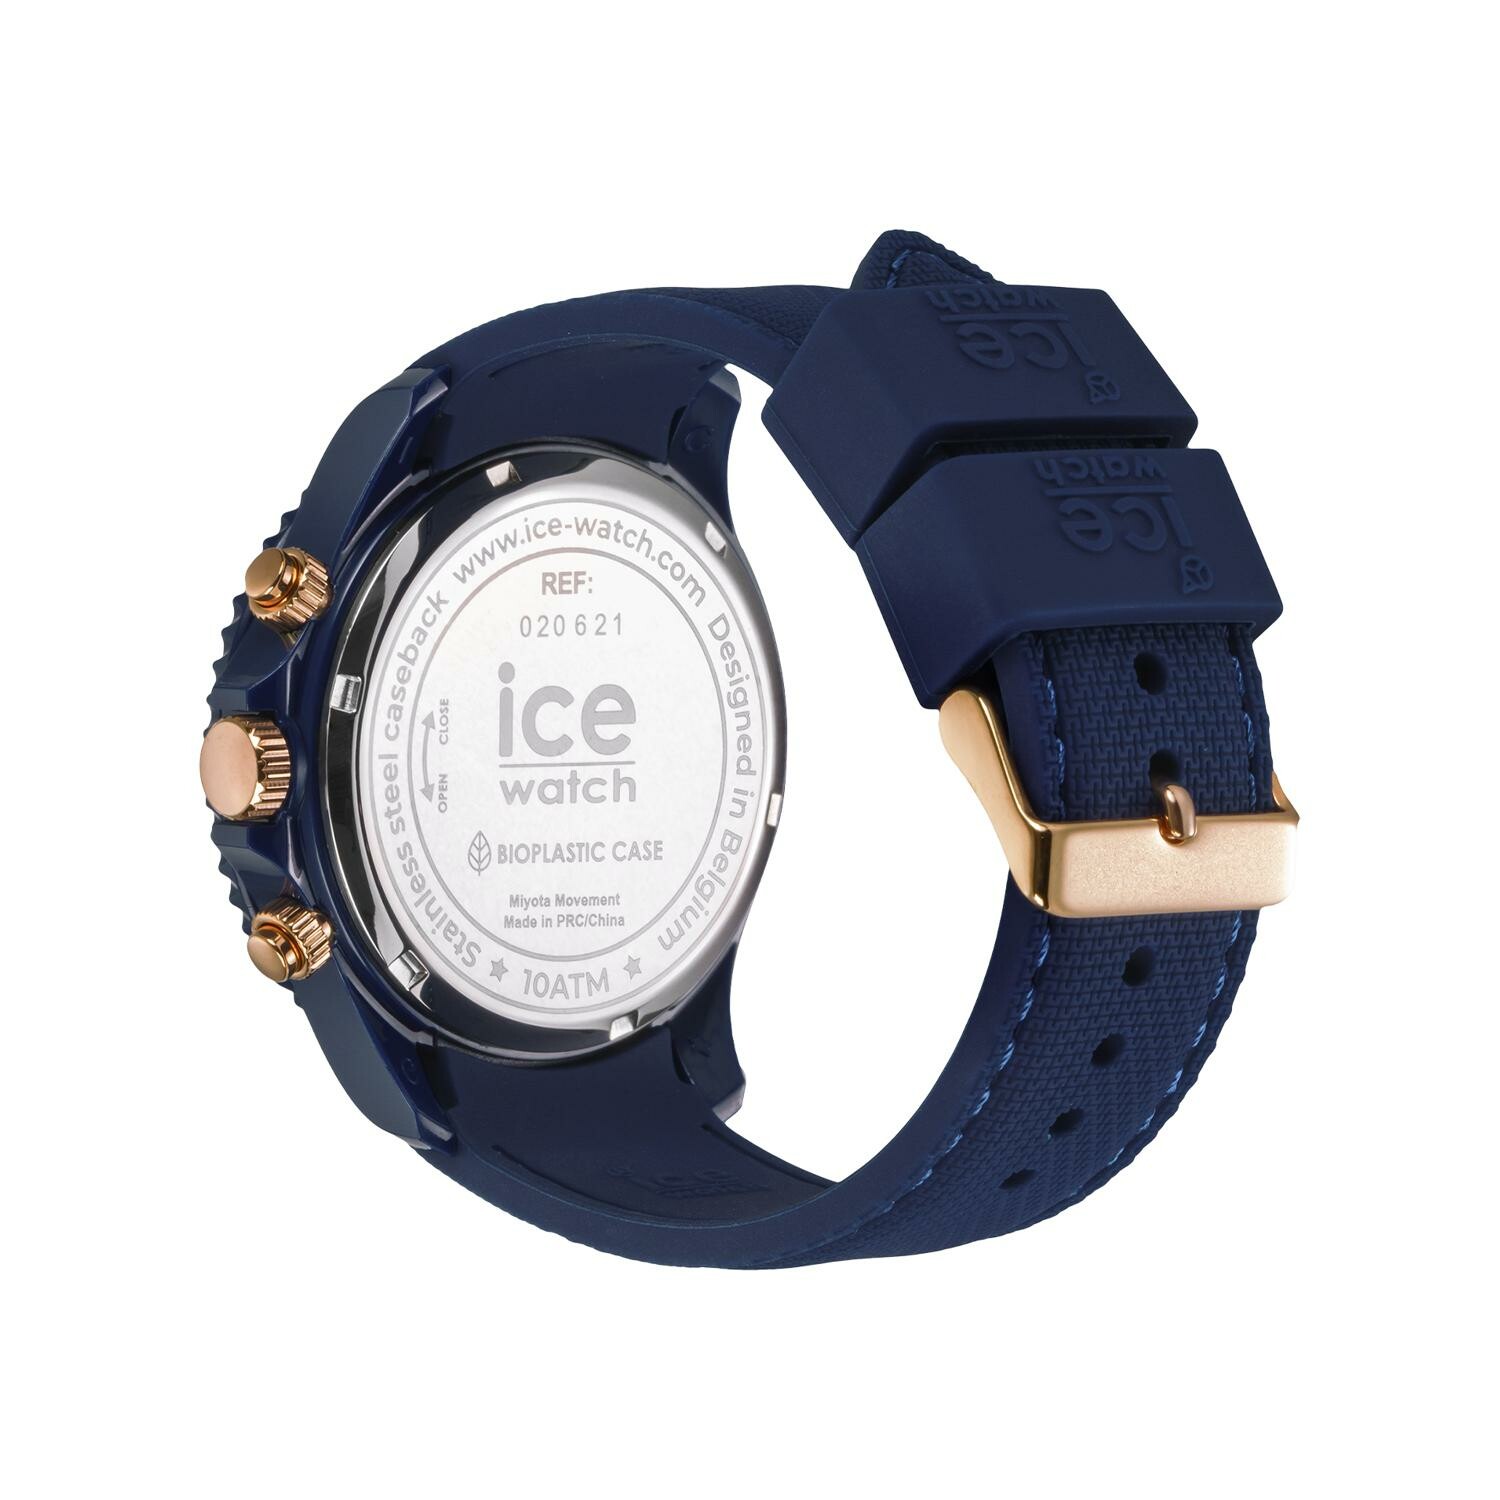 Achat Montre Watch Ice ICE Blue rose-gold chrono